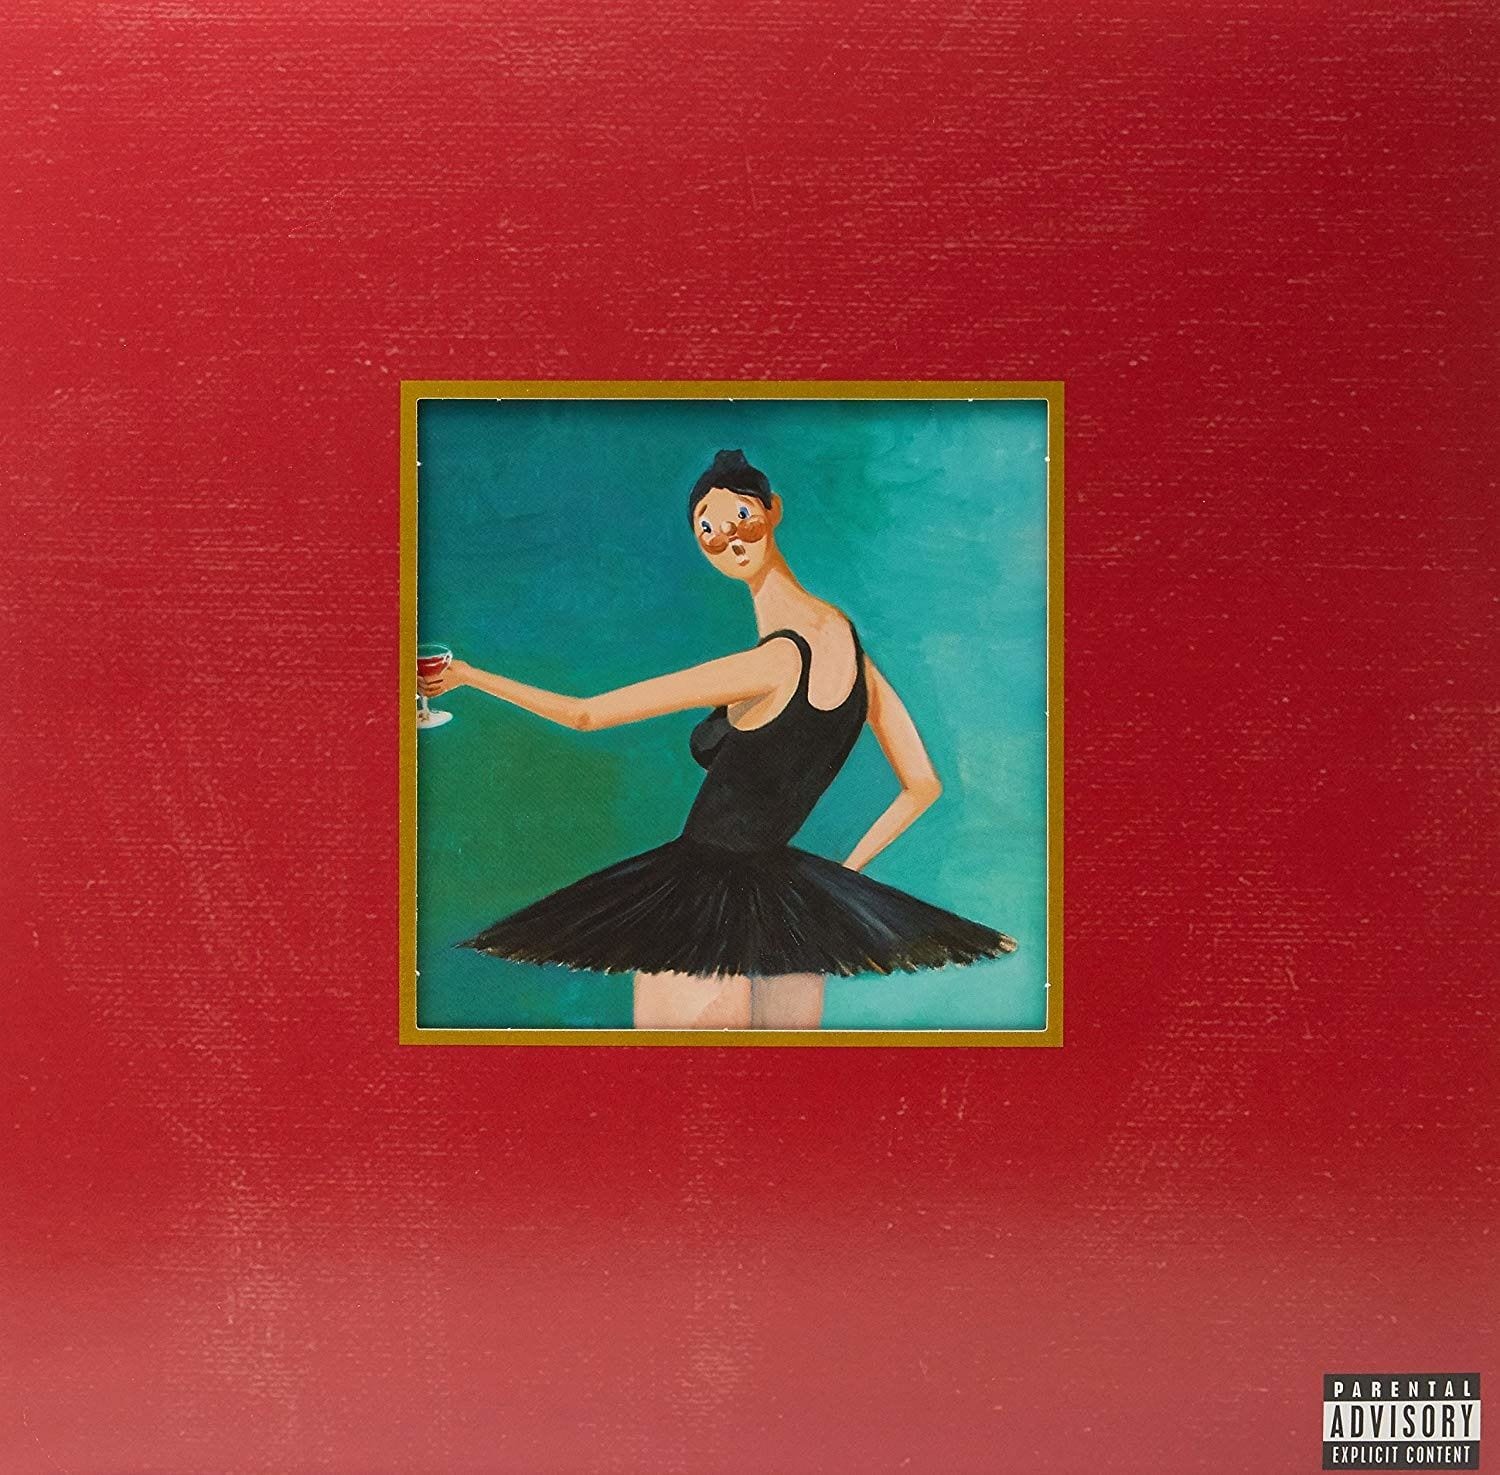 Where Does Kanye West’s ‘My Beautiful Dark Twisted Fantasy’ Stand in the Canon?